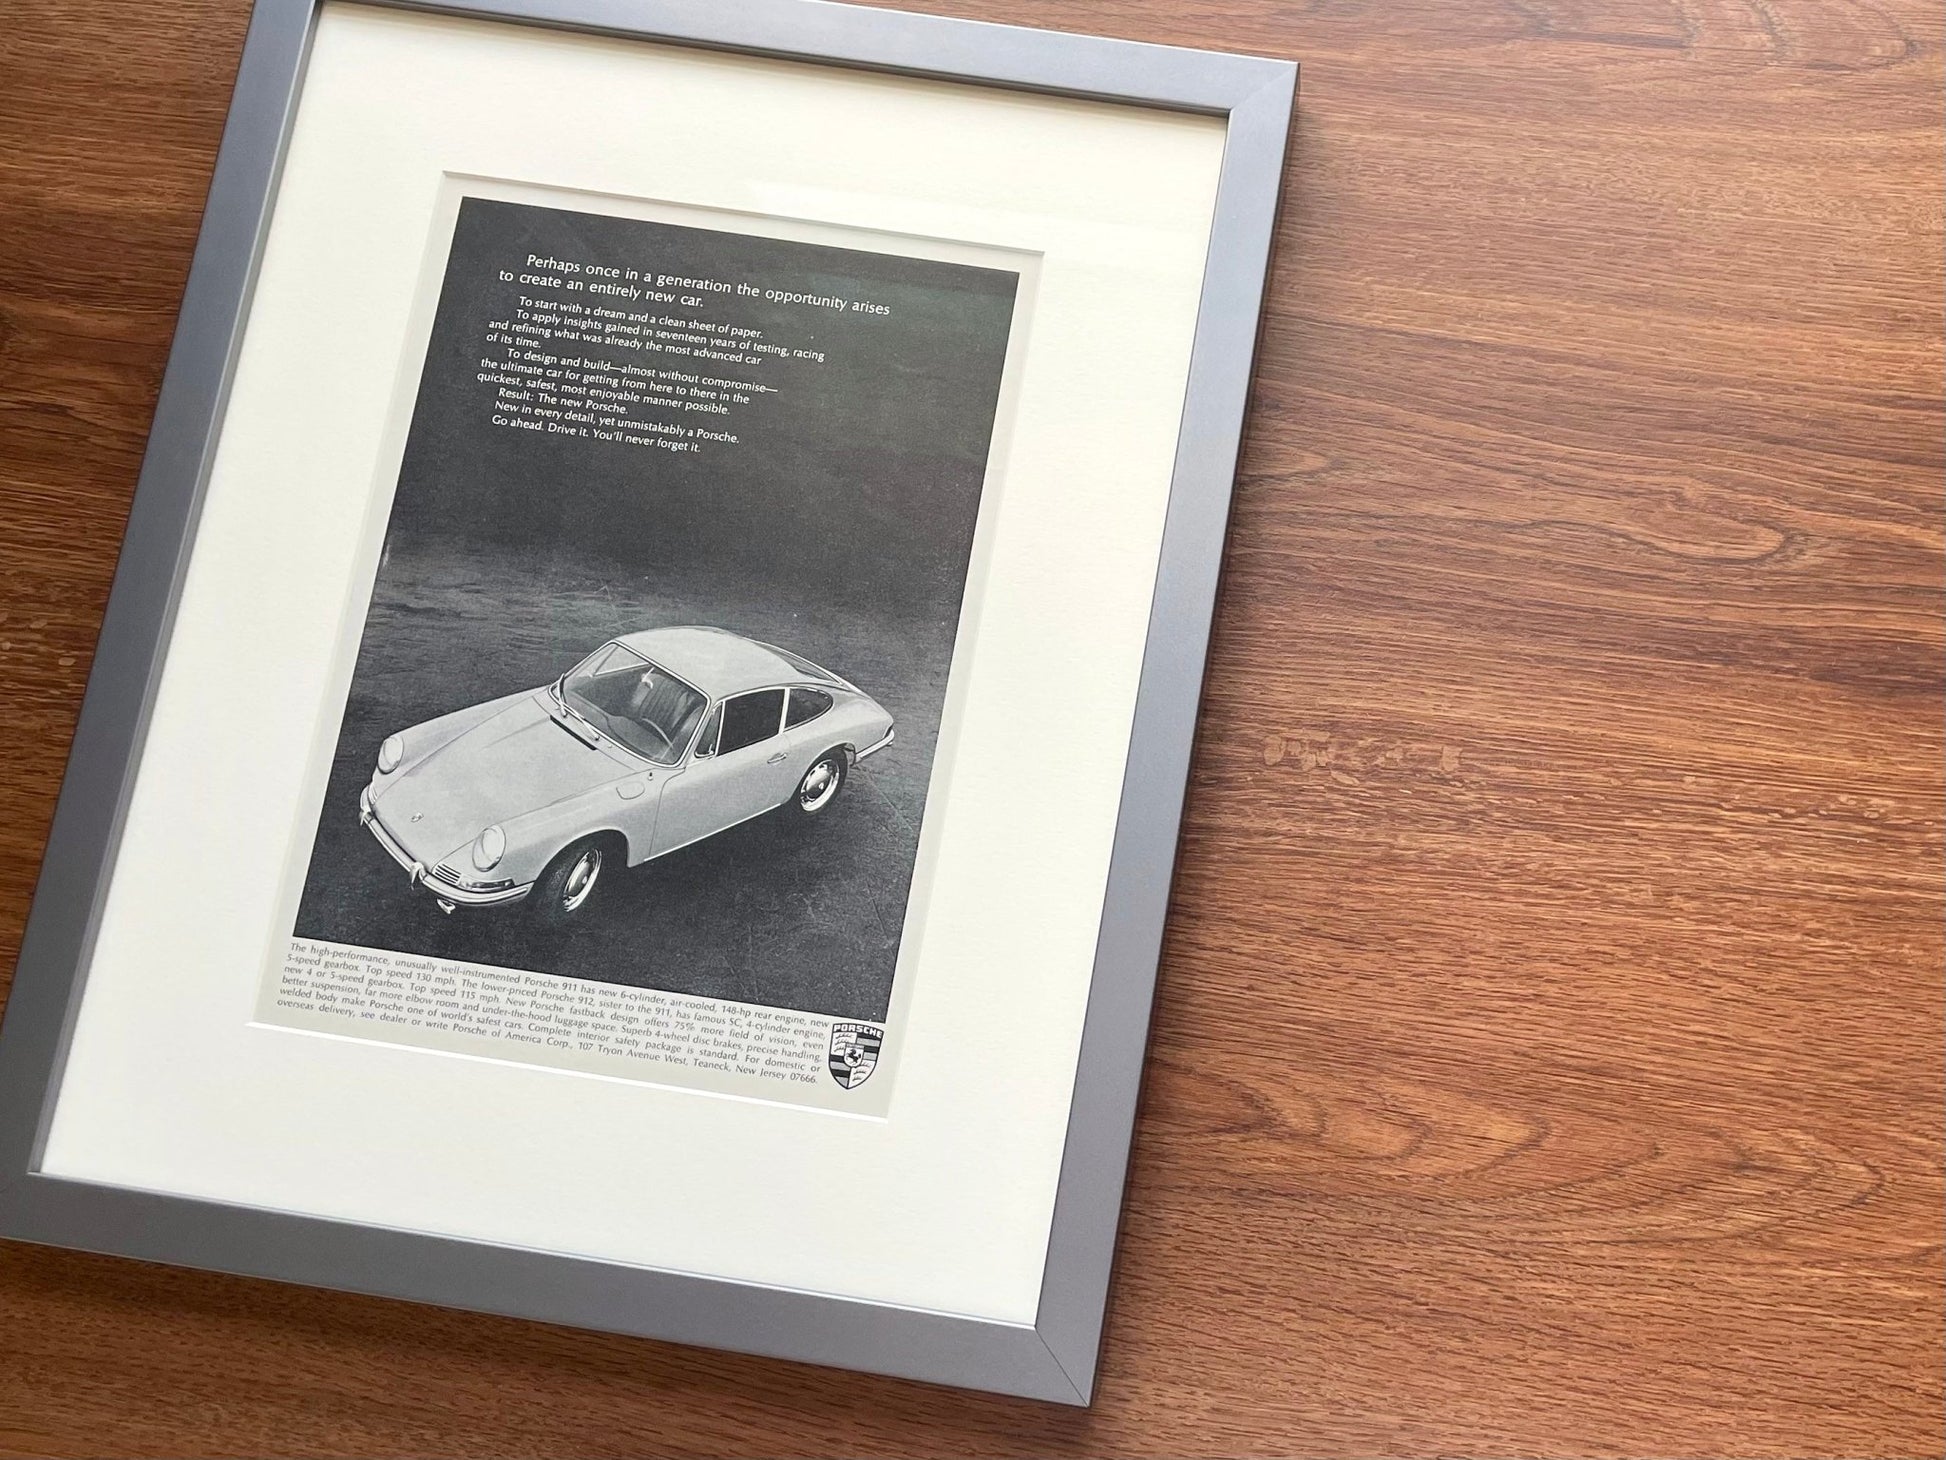 1965 Porsche 911 "once in a generation..." Advertisement in Gunmetal Wood Frame